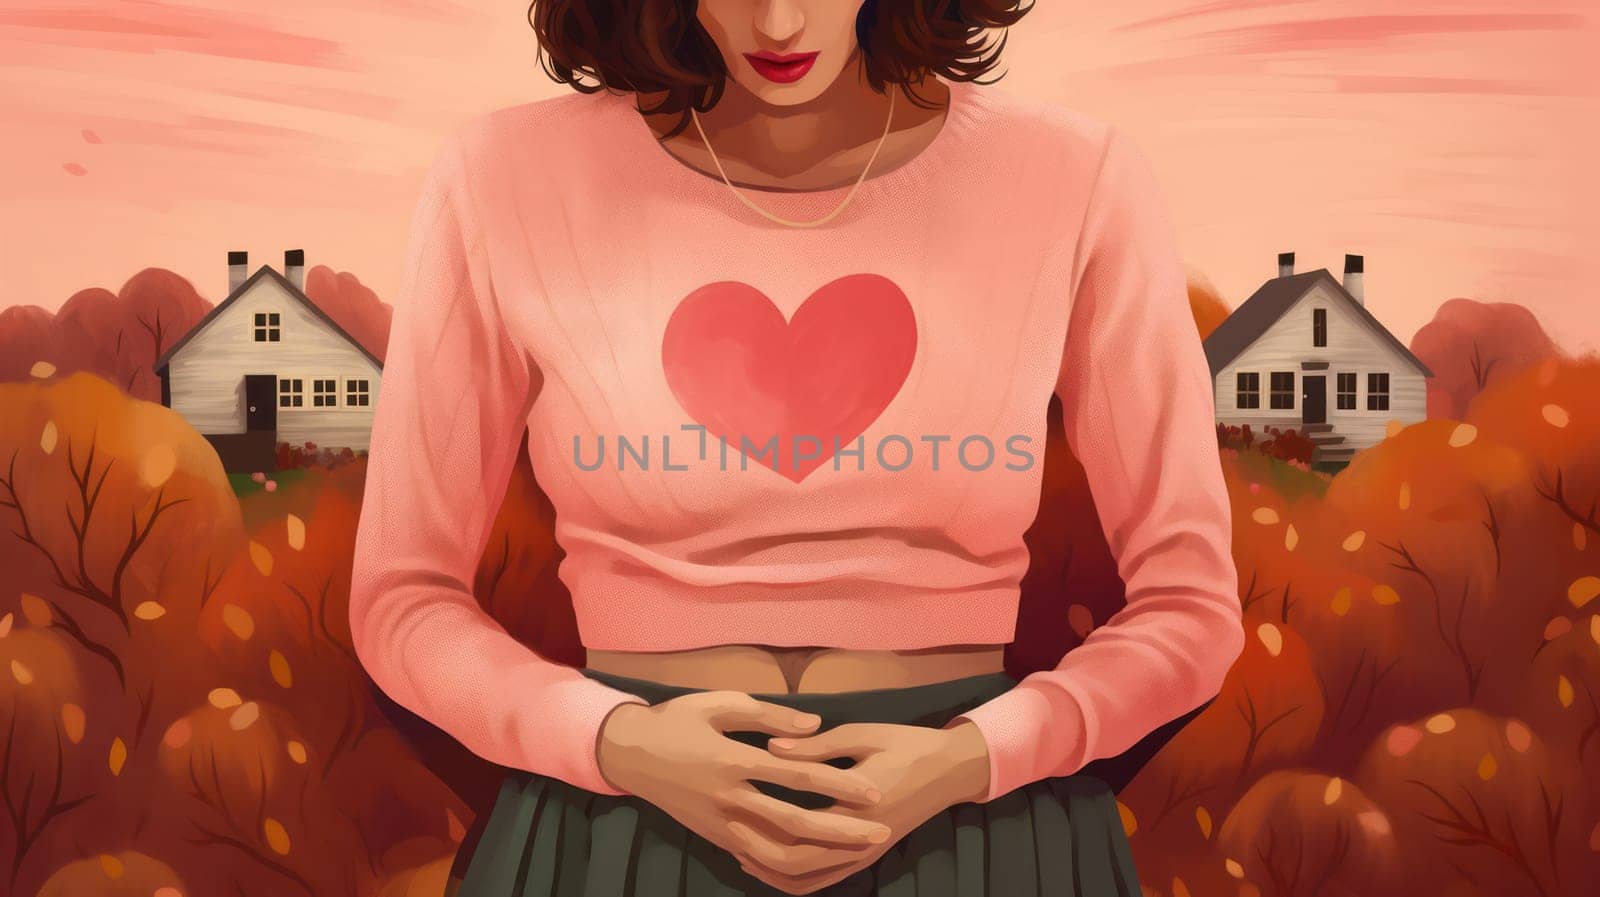 Lovely Red Heart: A Beautiful Valentine's Day Illustration with a Cute Vintage Design and Retro Style.